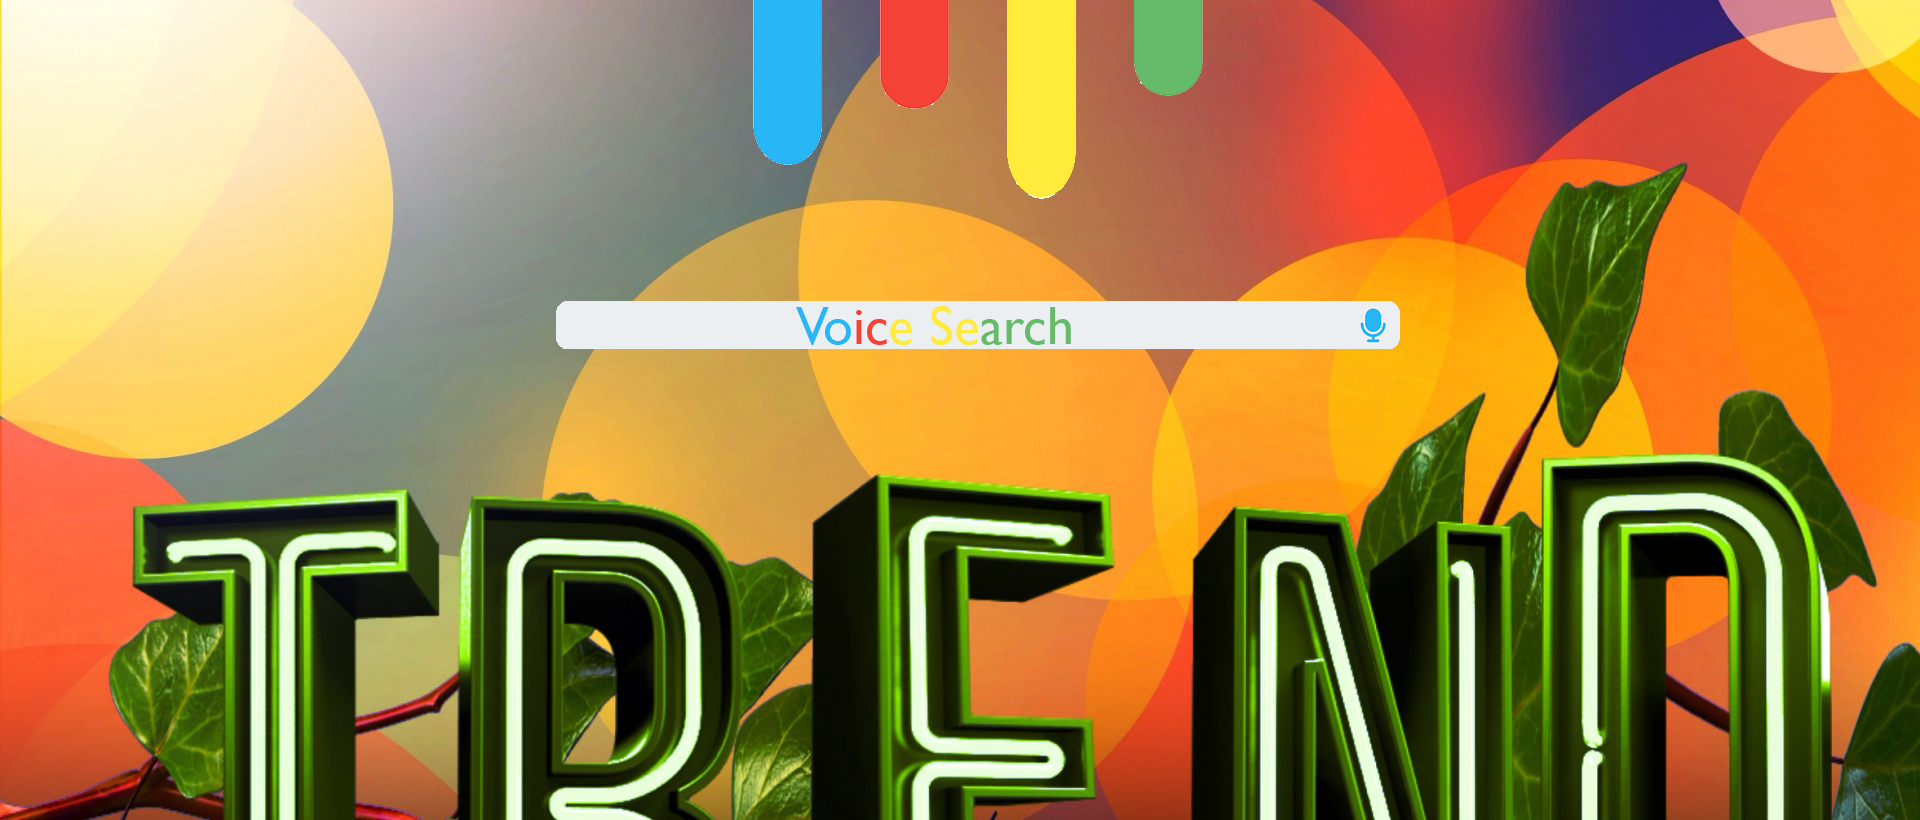 Voice Search Trend 2017